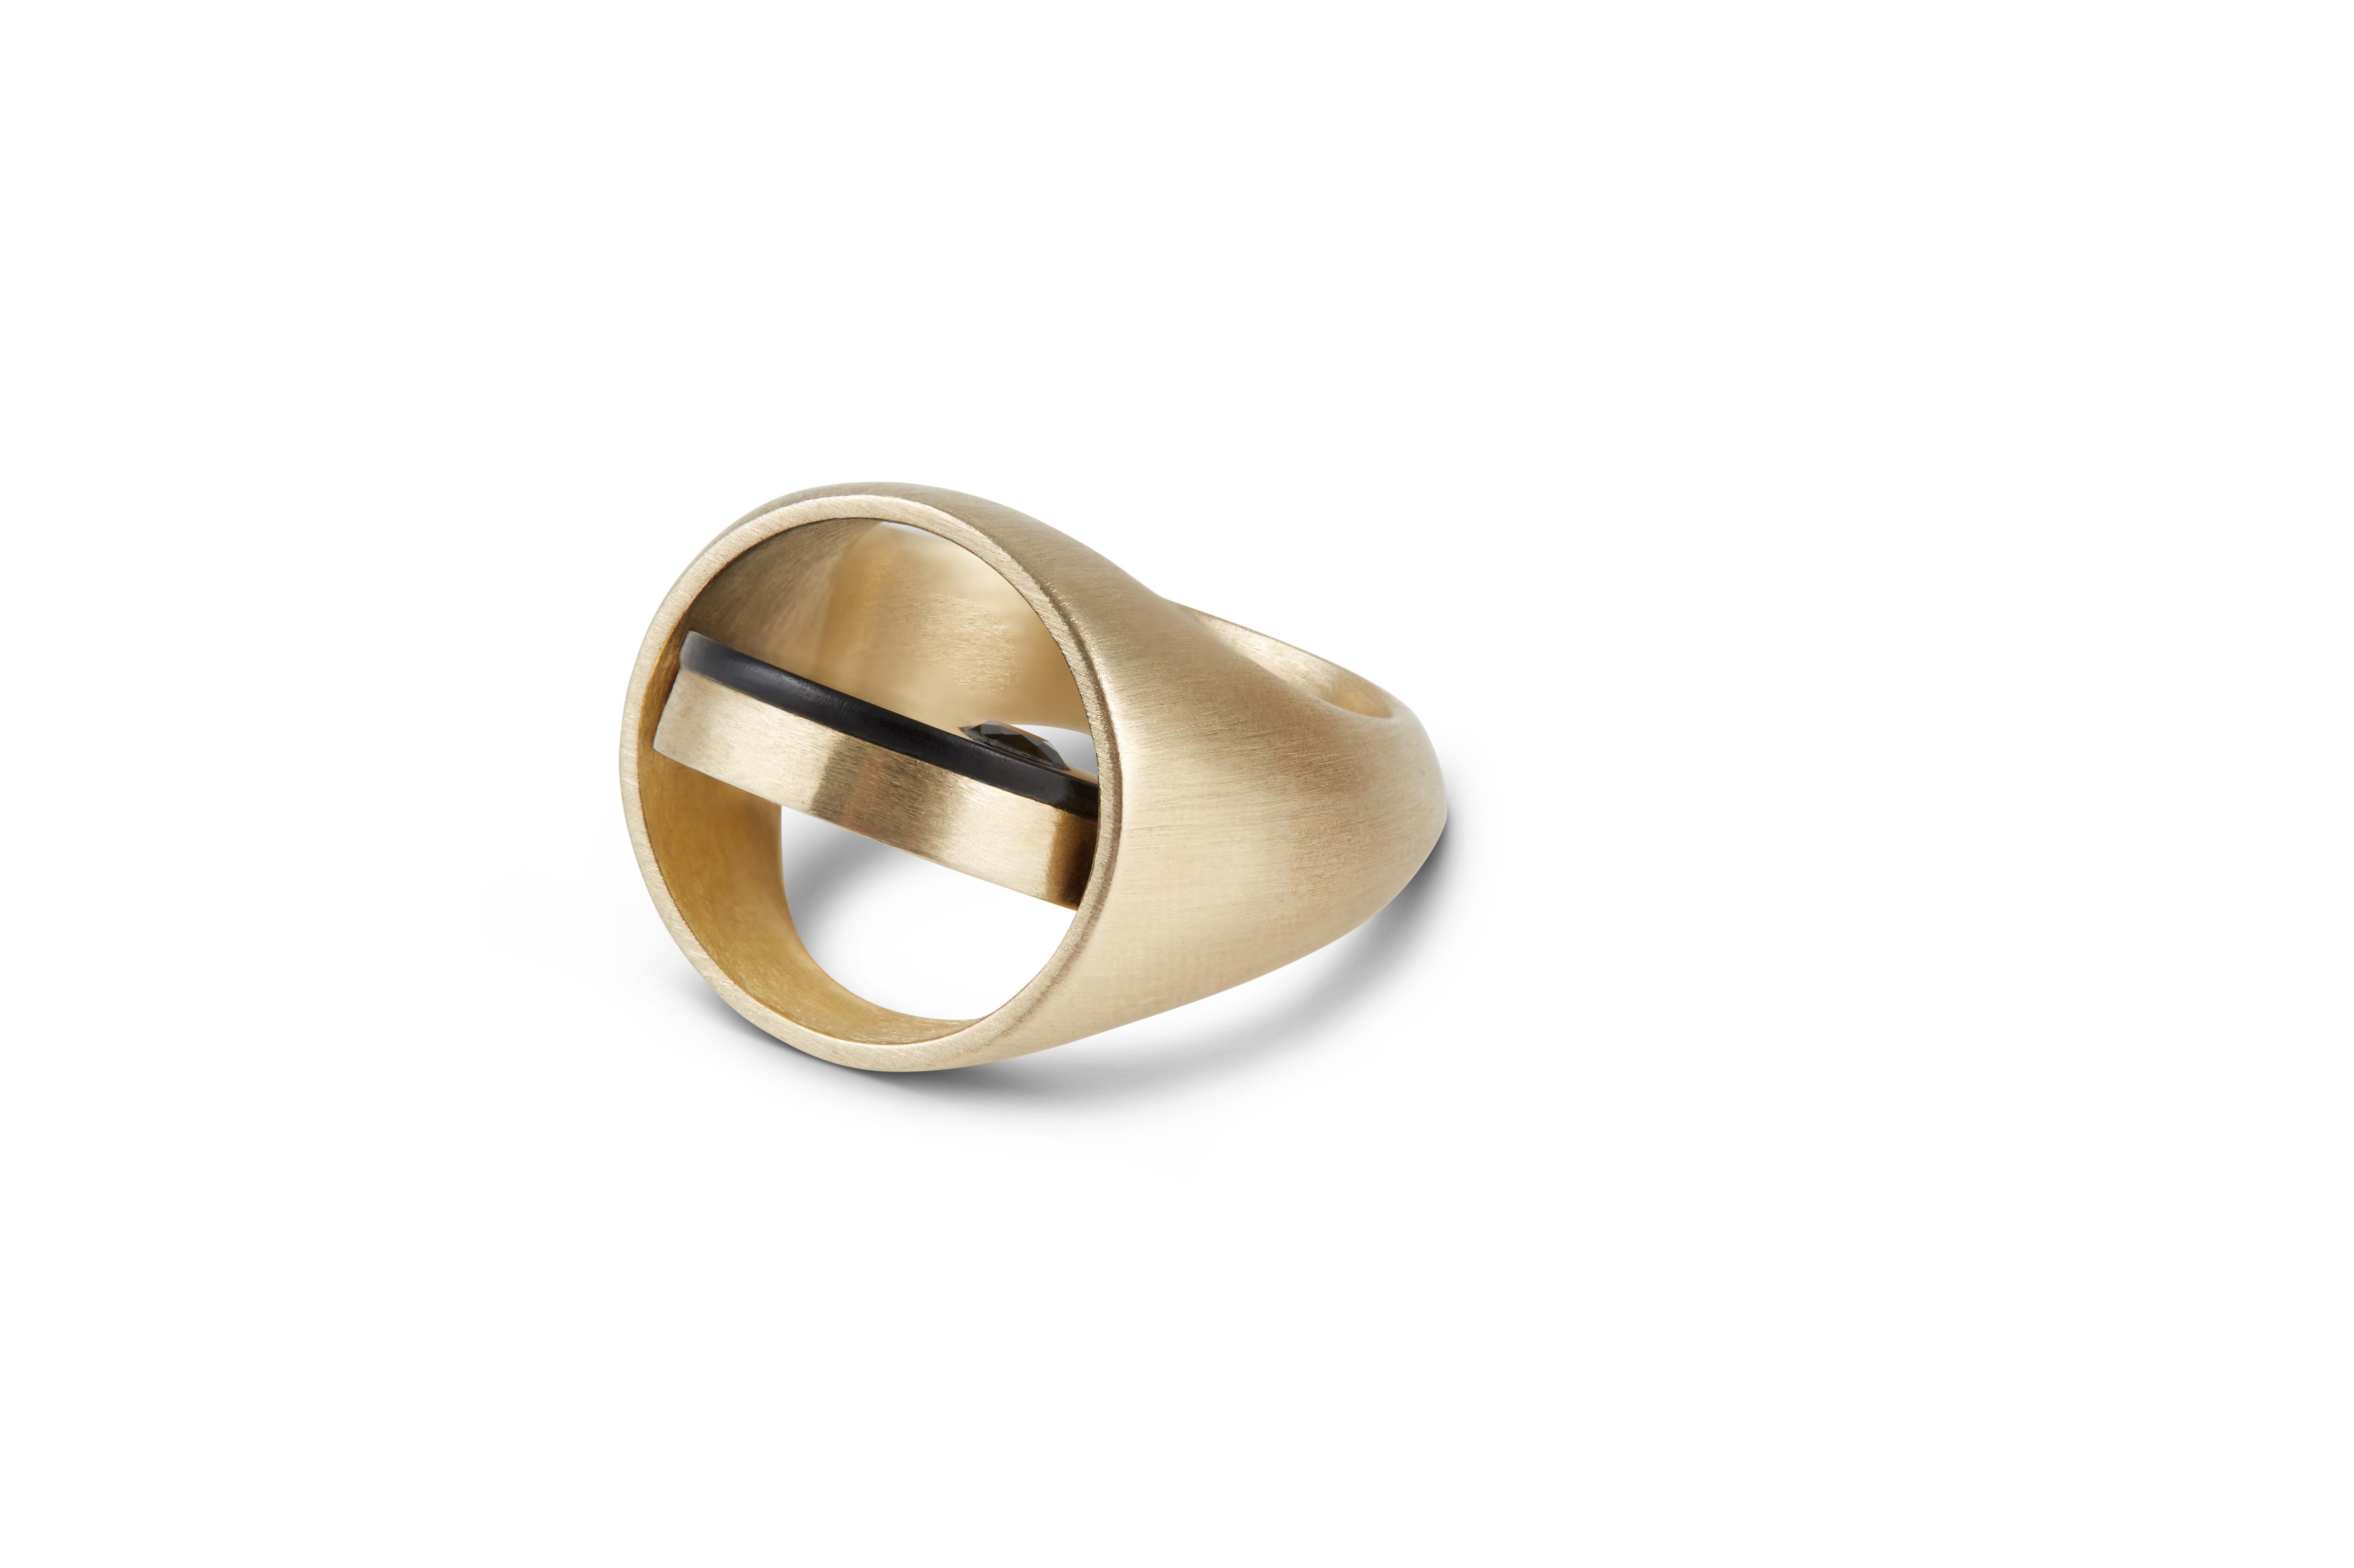 Signet rings have many connotations attached to them. Though first devised to seal correspondence with an engraved family crest to represent personal status and power, they’re no longer solely reserved for country manor.

Present day for many, the